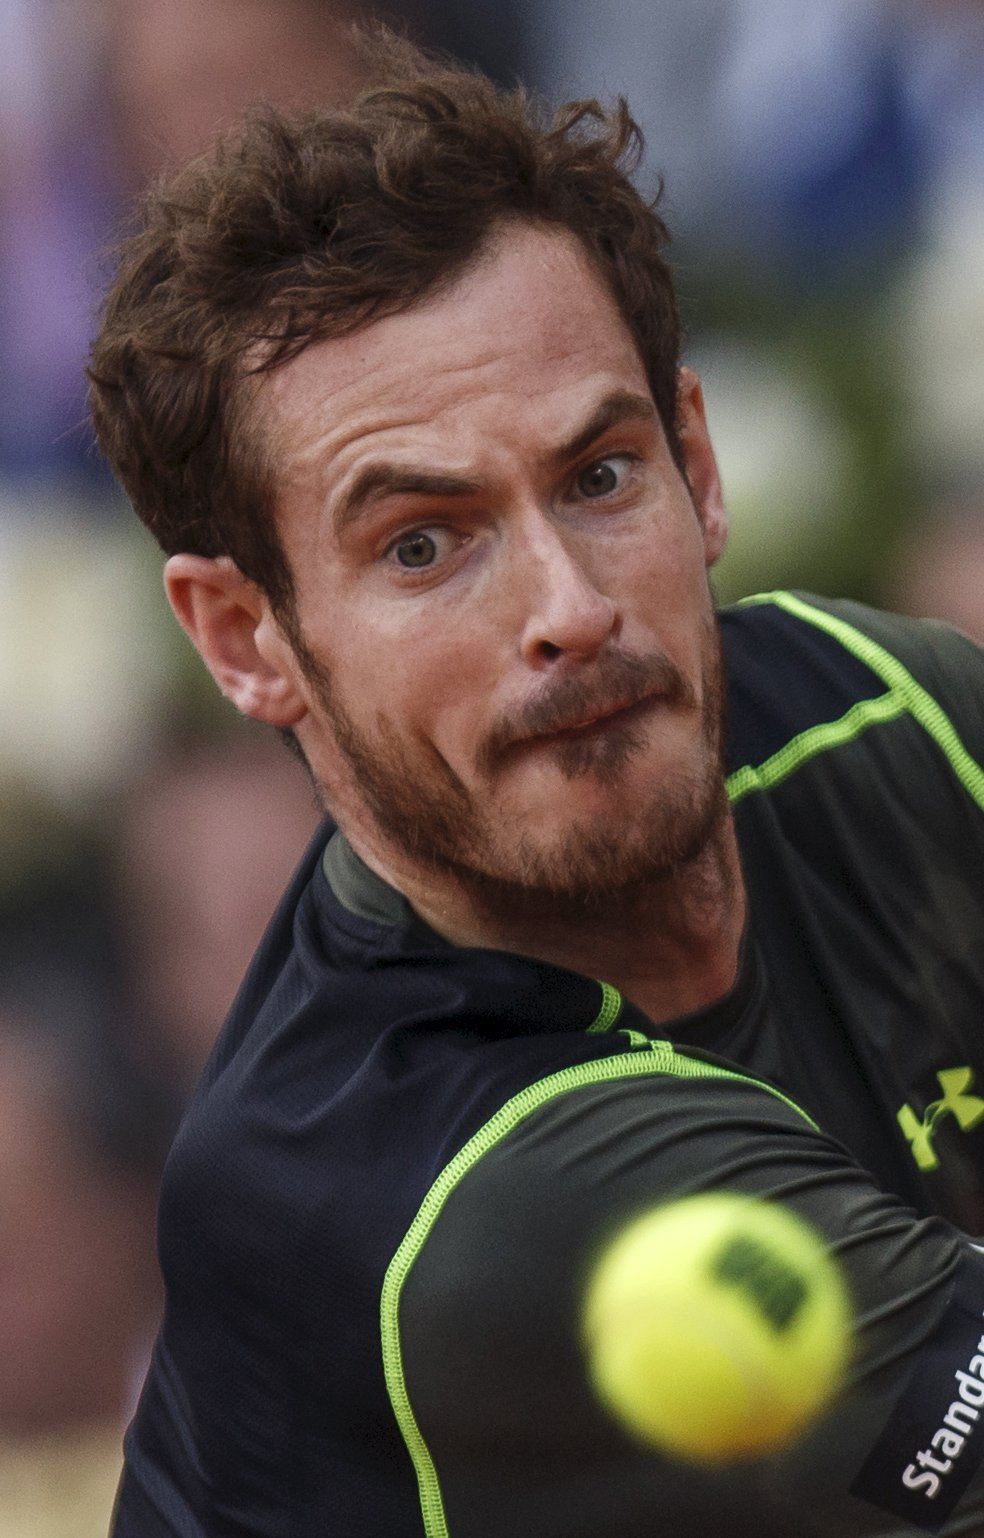 Britain's Murray eyes the ball before returning a backhand to Spain's Nadal during their final match at the Madrid Open tennis tournament in Madrid